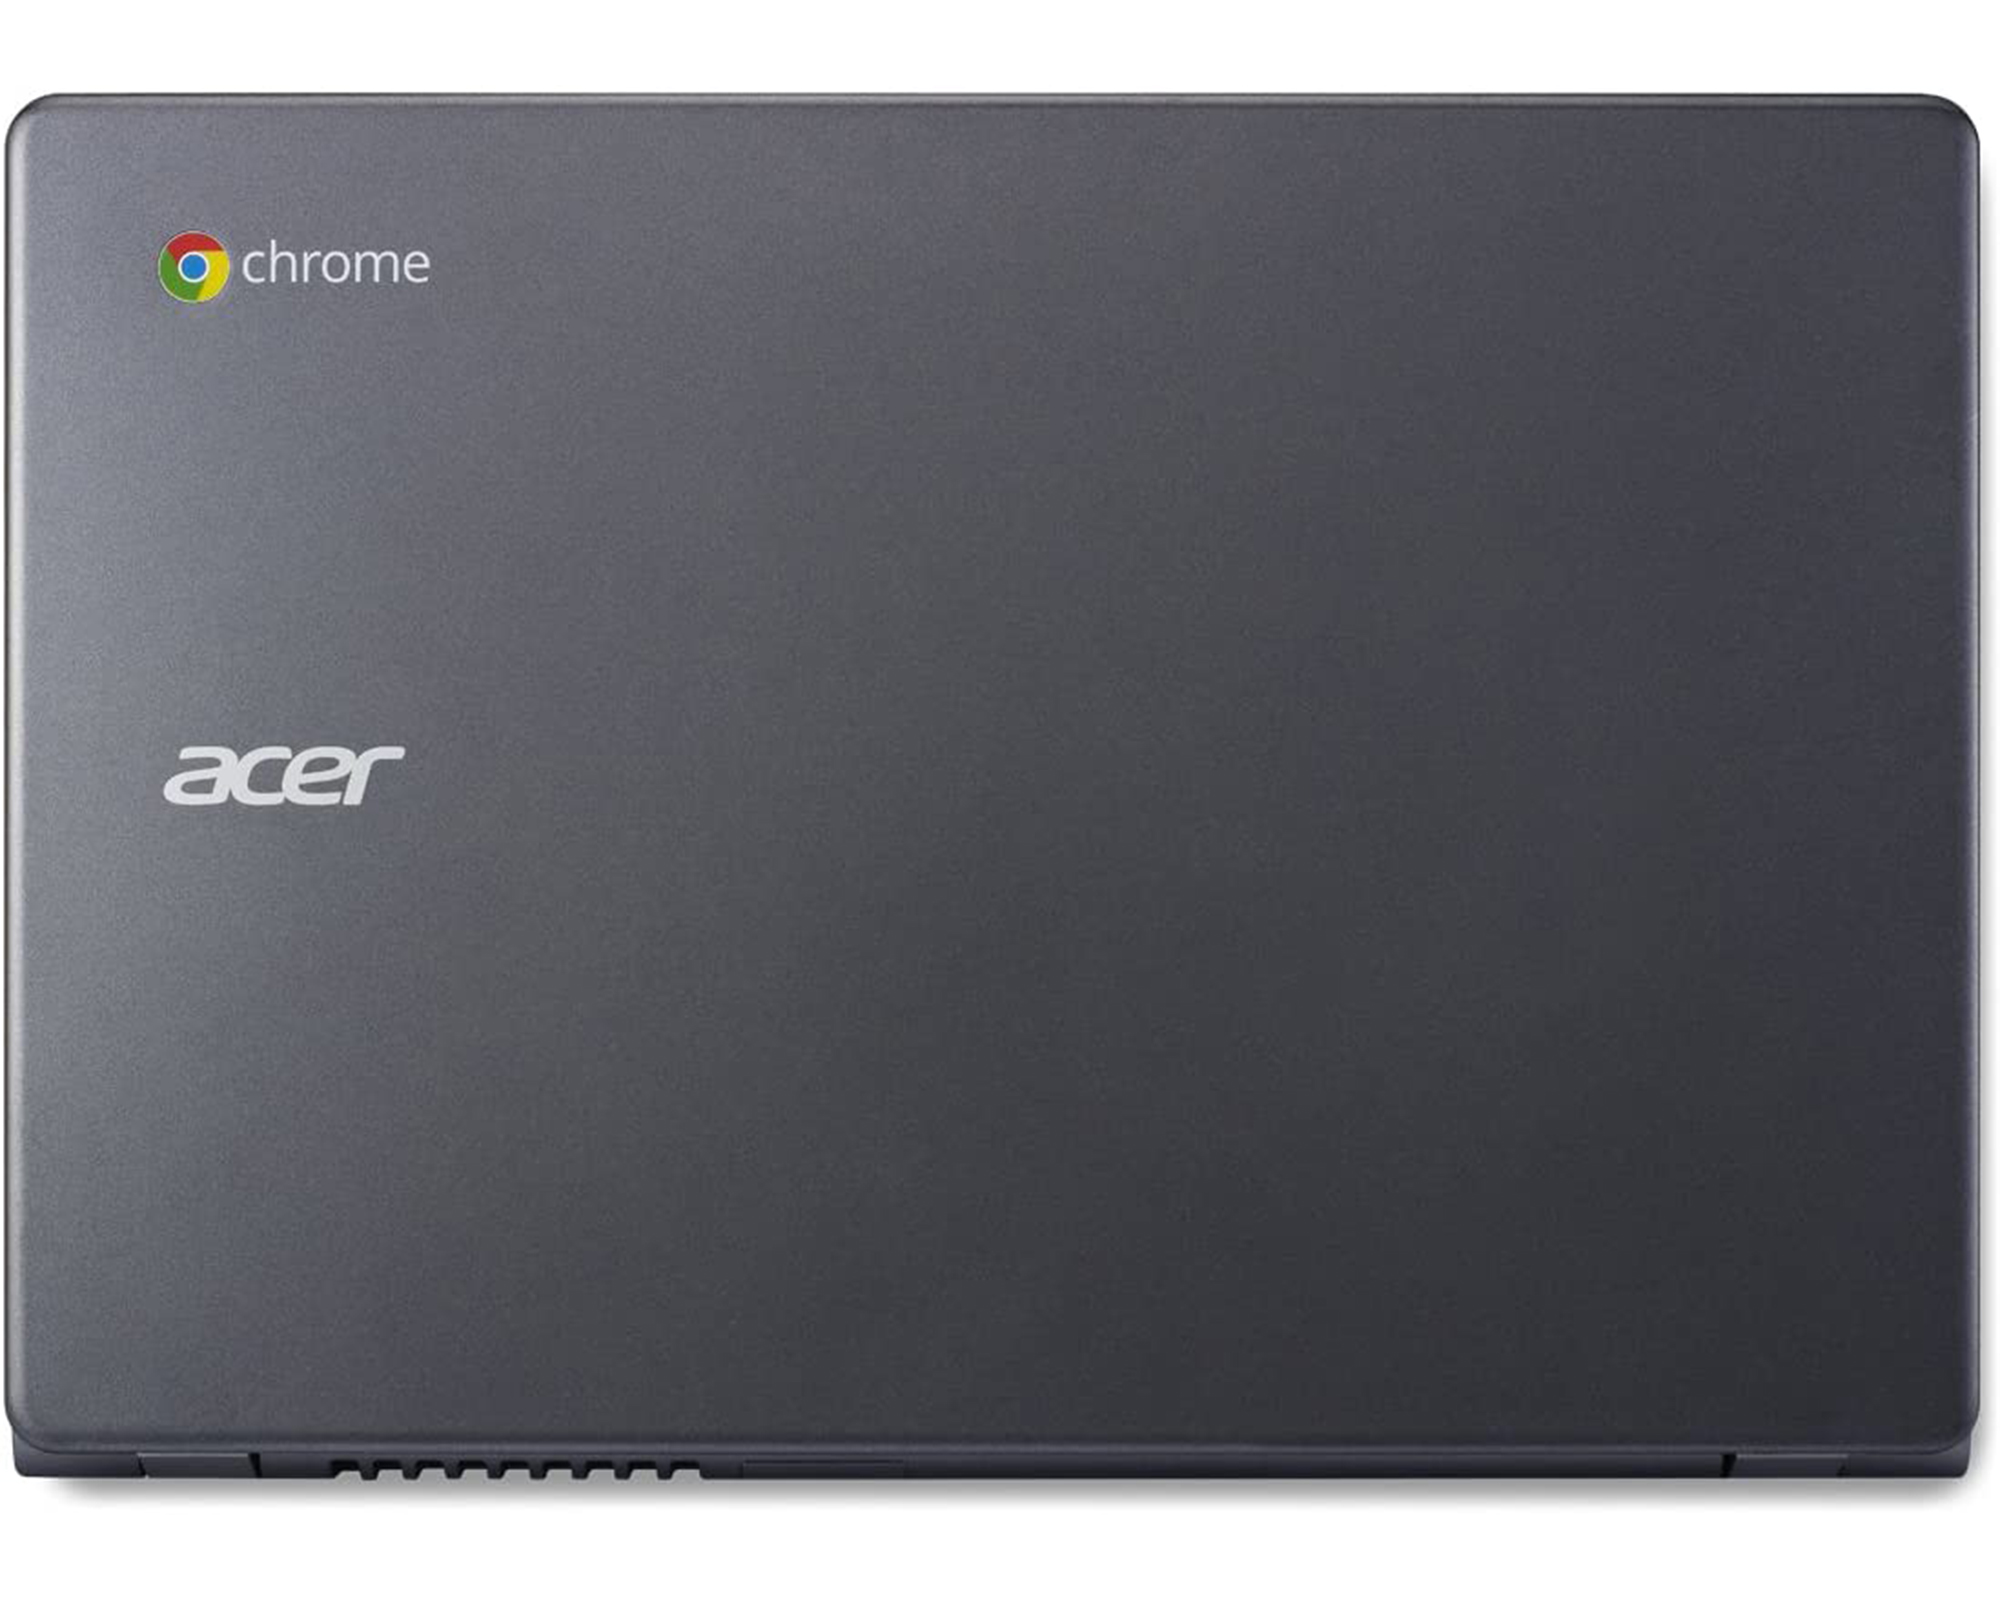 Restored Details about Acer C720-2103 11.6 in chromebook, Intel Celeron 1.4GHz 2GB Ram - image 8 of 8